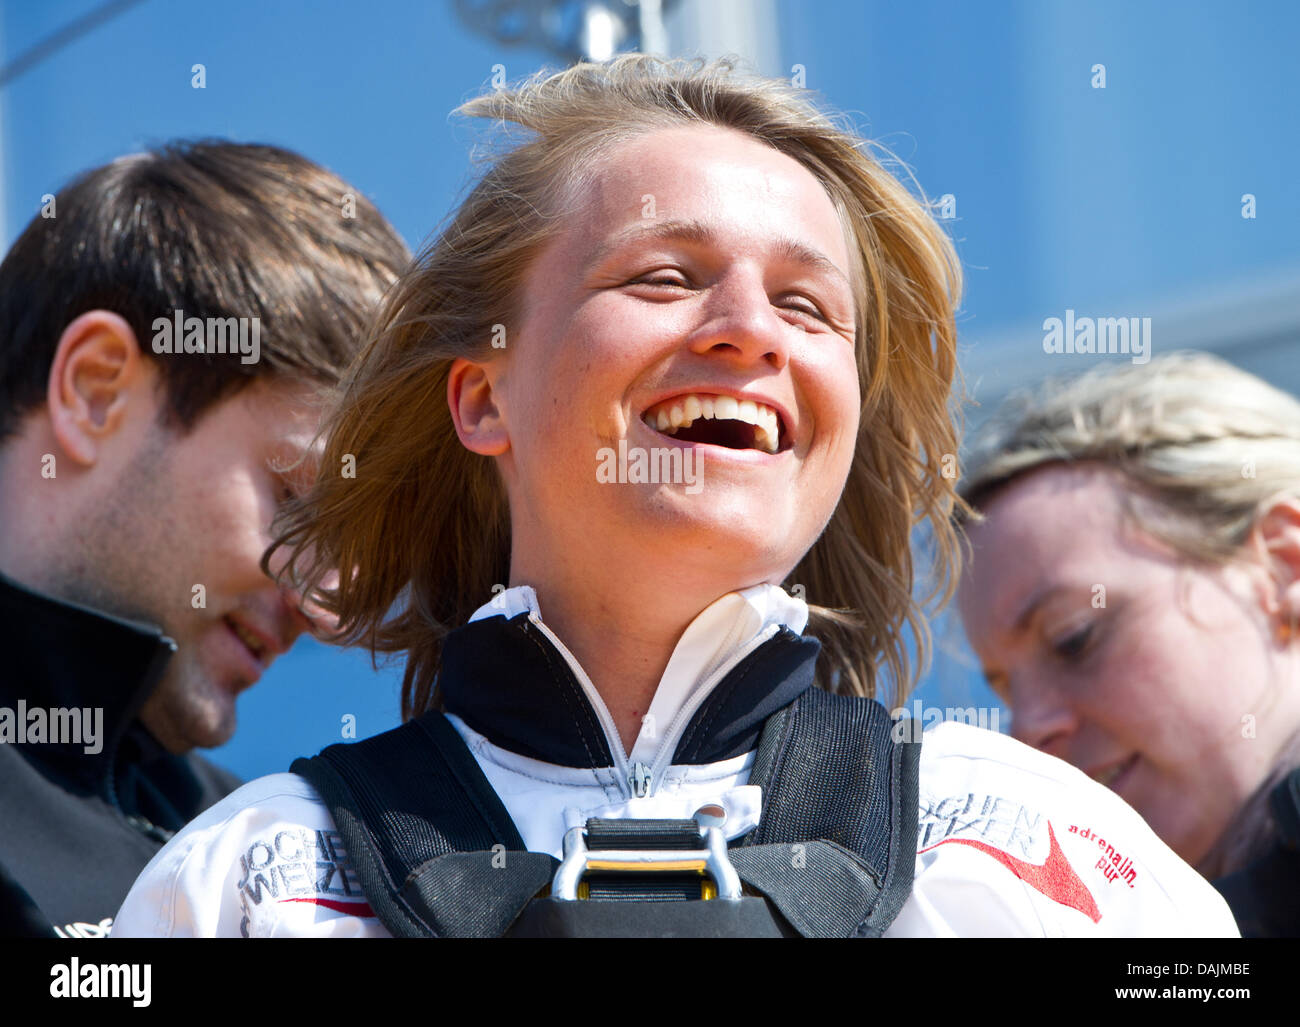 Fivefold paralympics victor Verena Bentele is pictured after a bungee jump from a skyscraper on Alexanderplatz in Berlin, Germany, 19 April 2011. The blind athelte jumped about 100 meters down during the so called base flying. Photo: Tobias Kleinschmidt Stock Photo